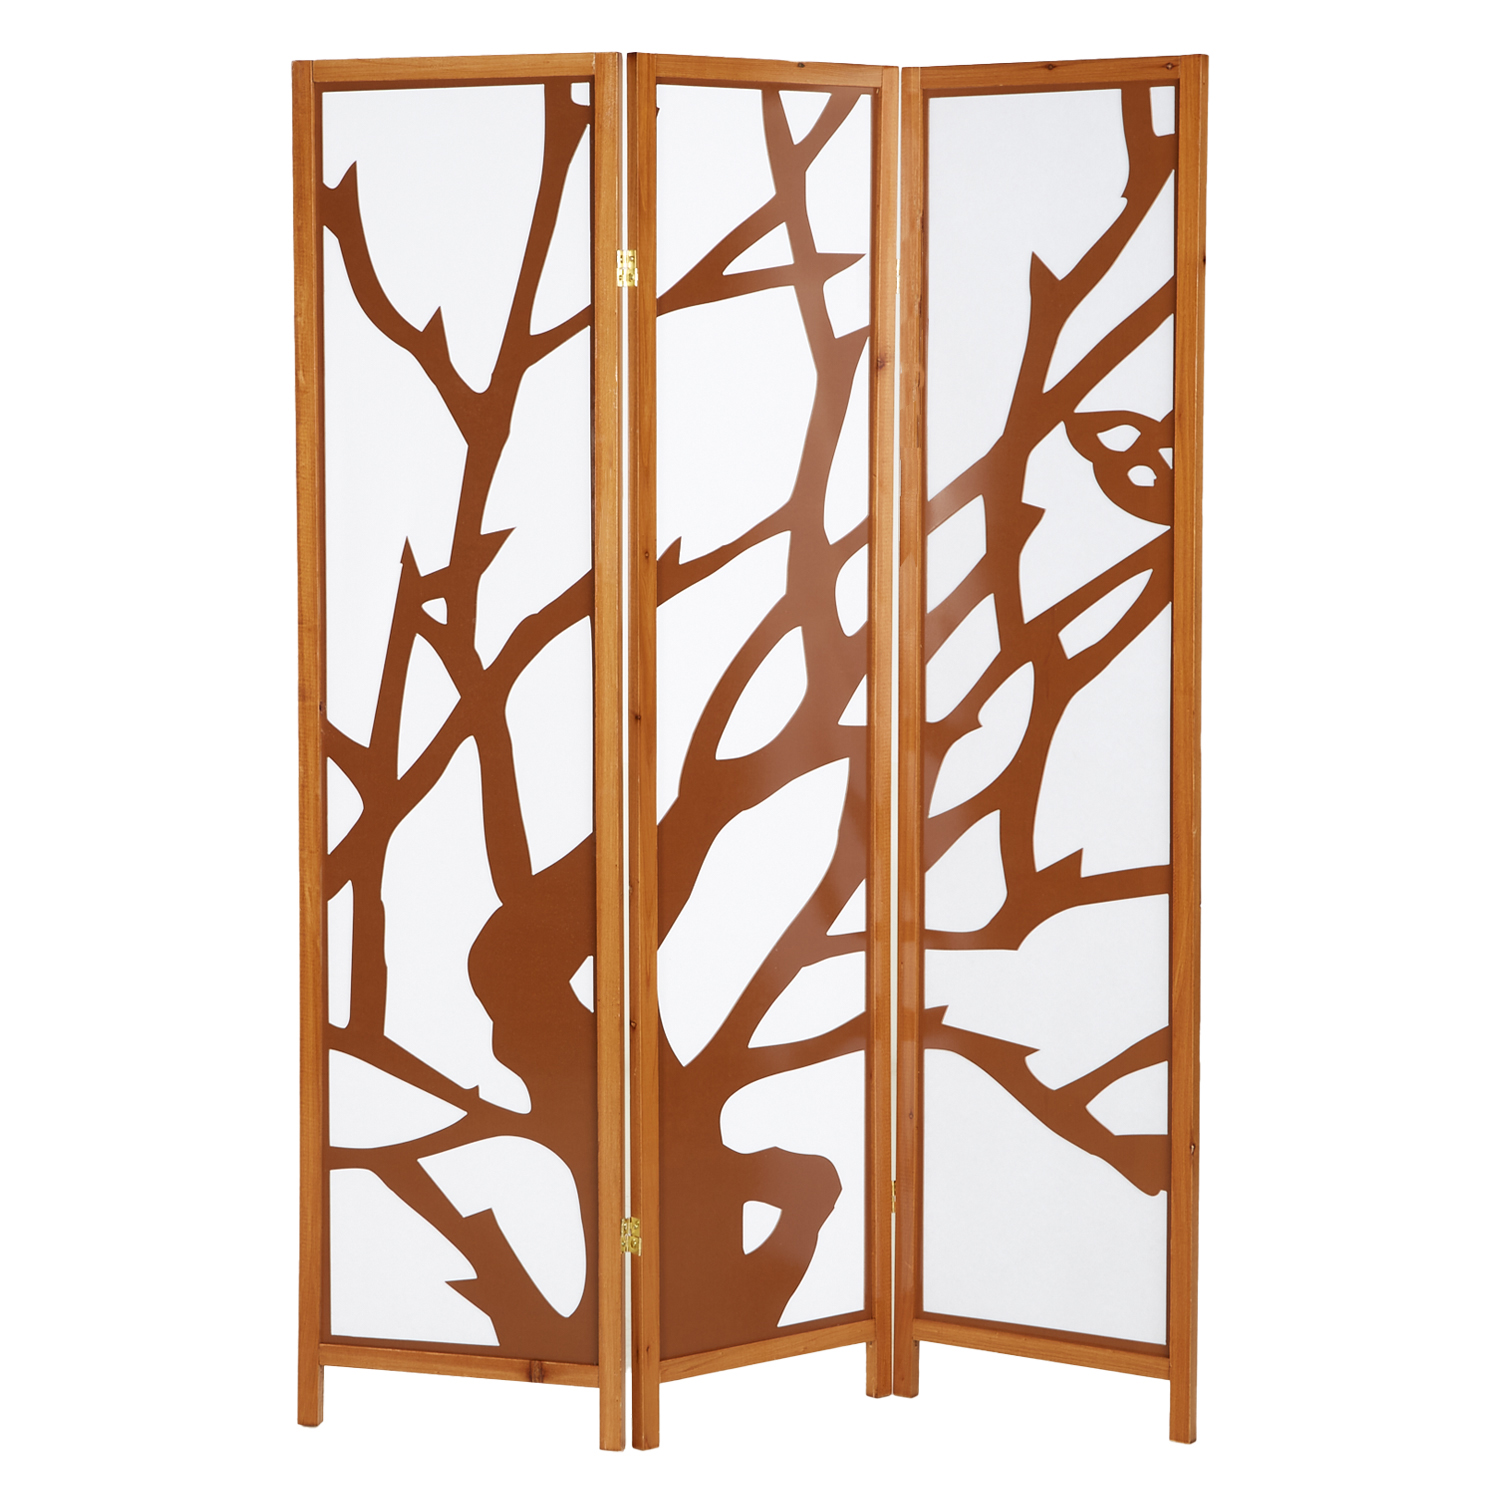 Paravent room divider 3 parts wood partition wall privacy screen brown